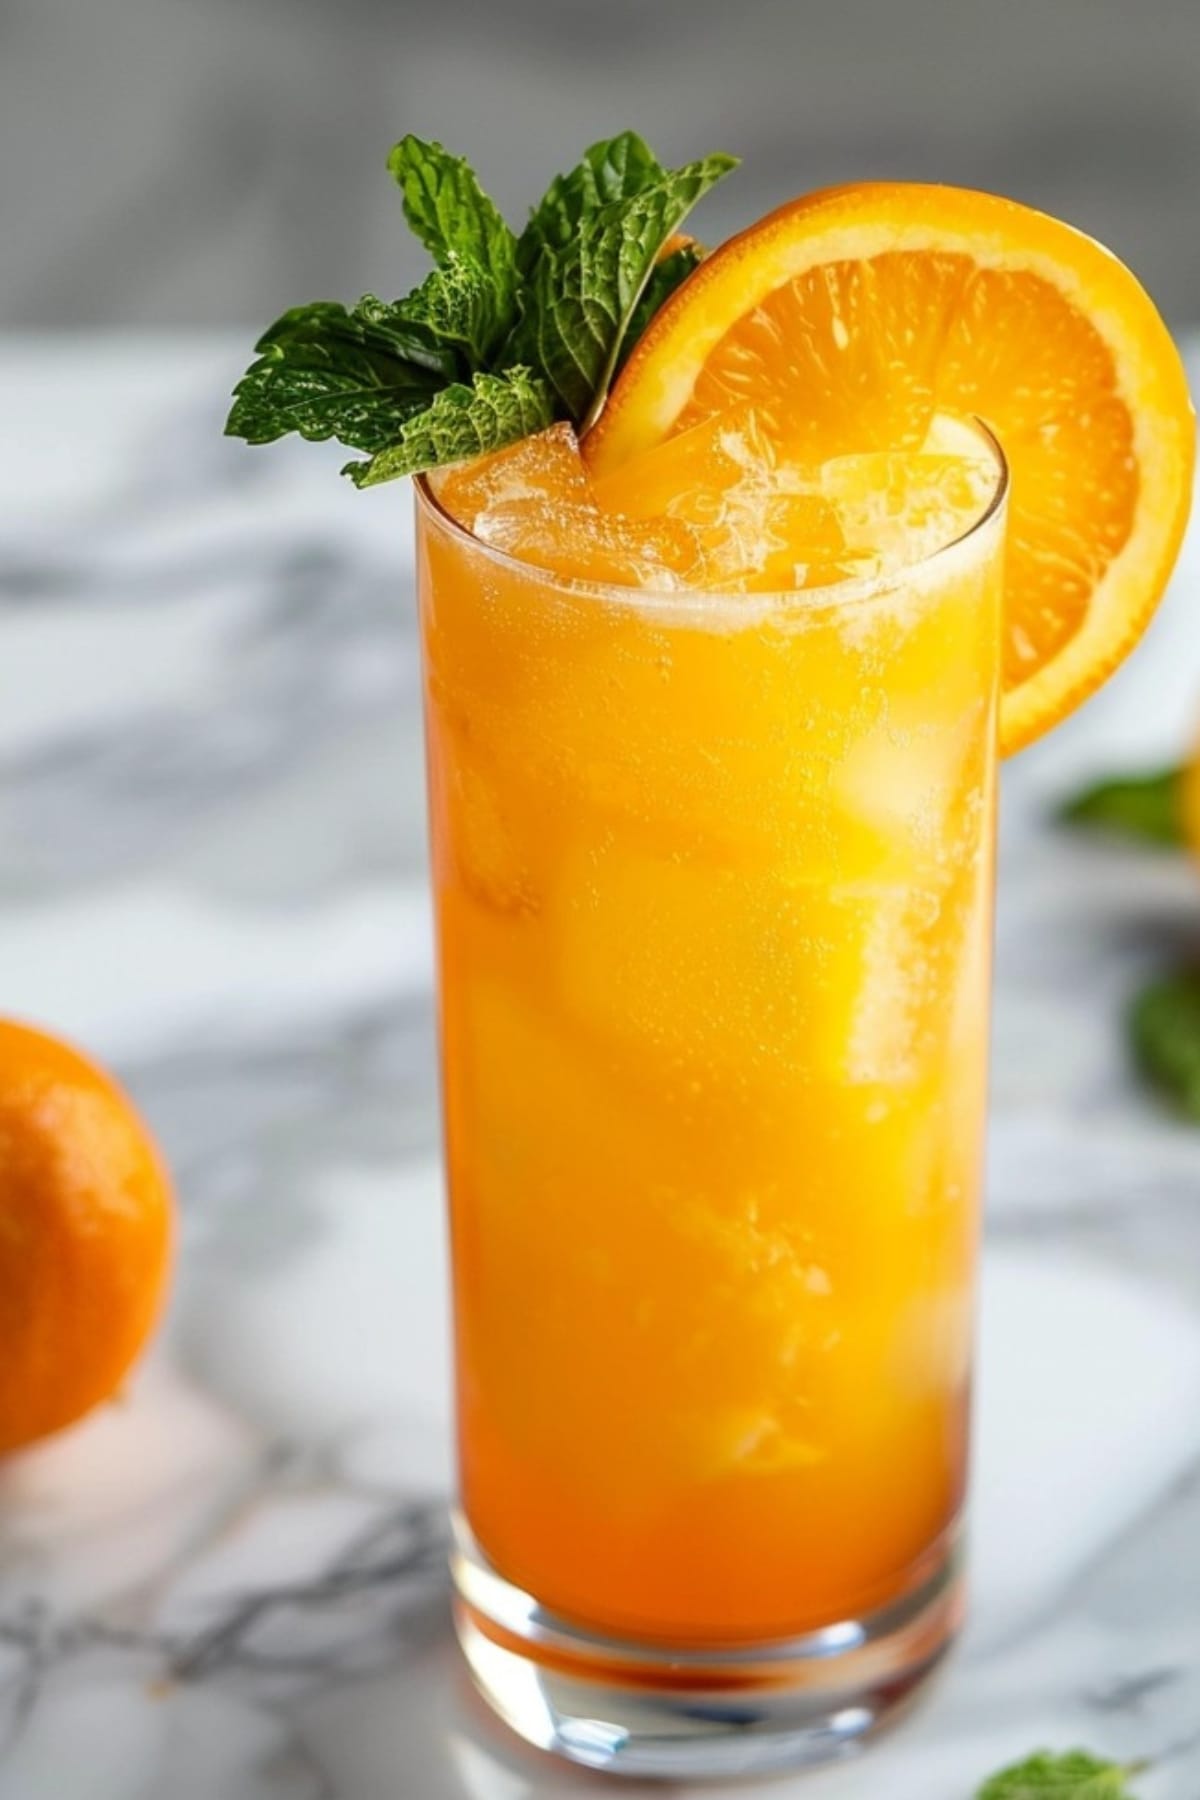 Orange crush cocktail garnished with mint sprig and orange slice served on a high ball glass.